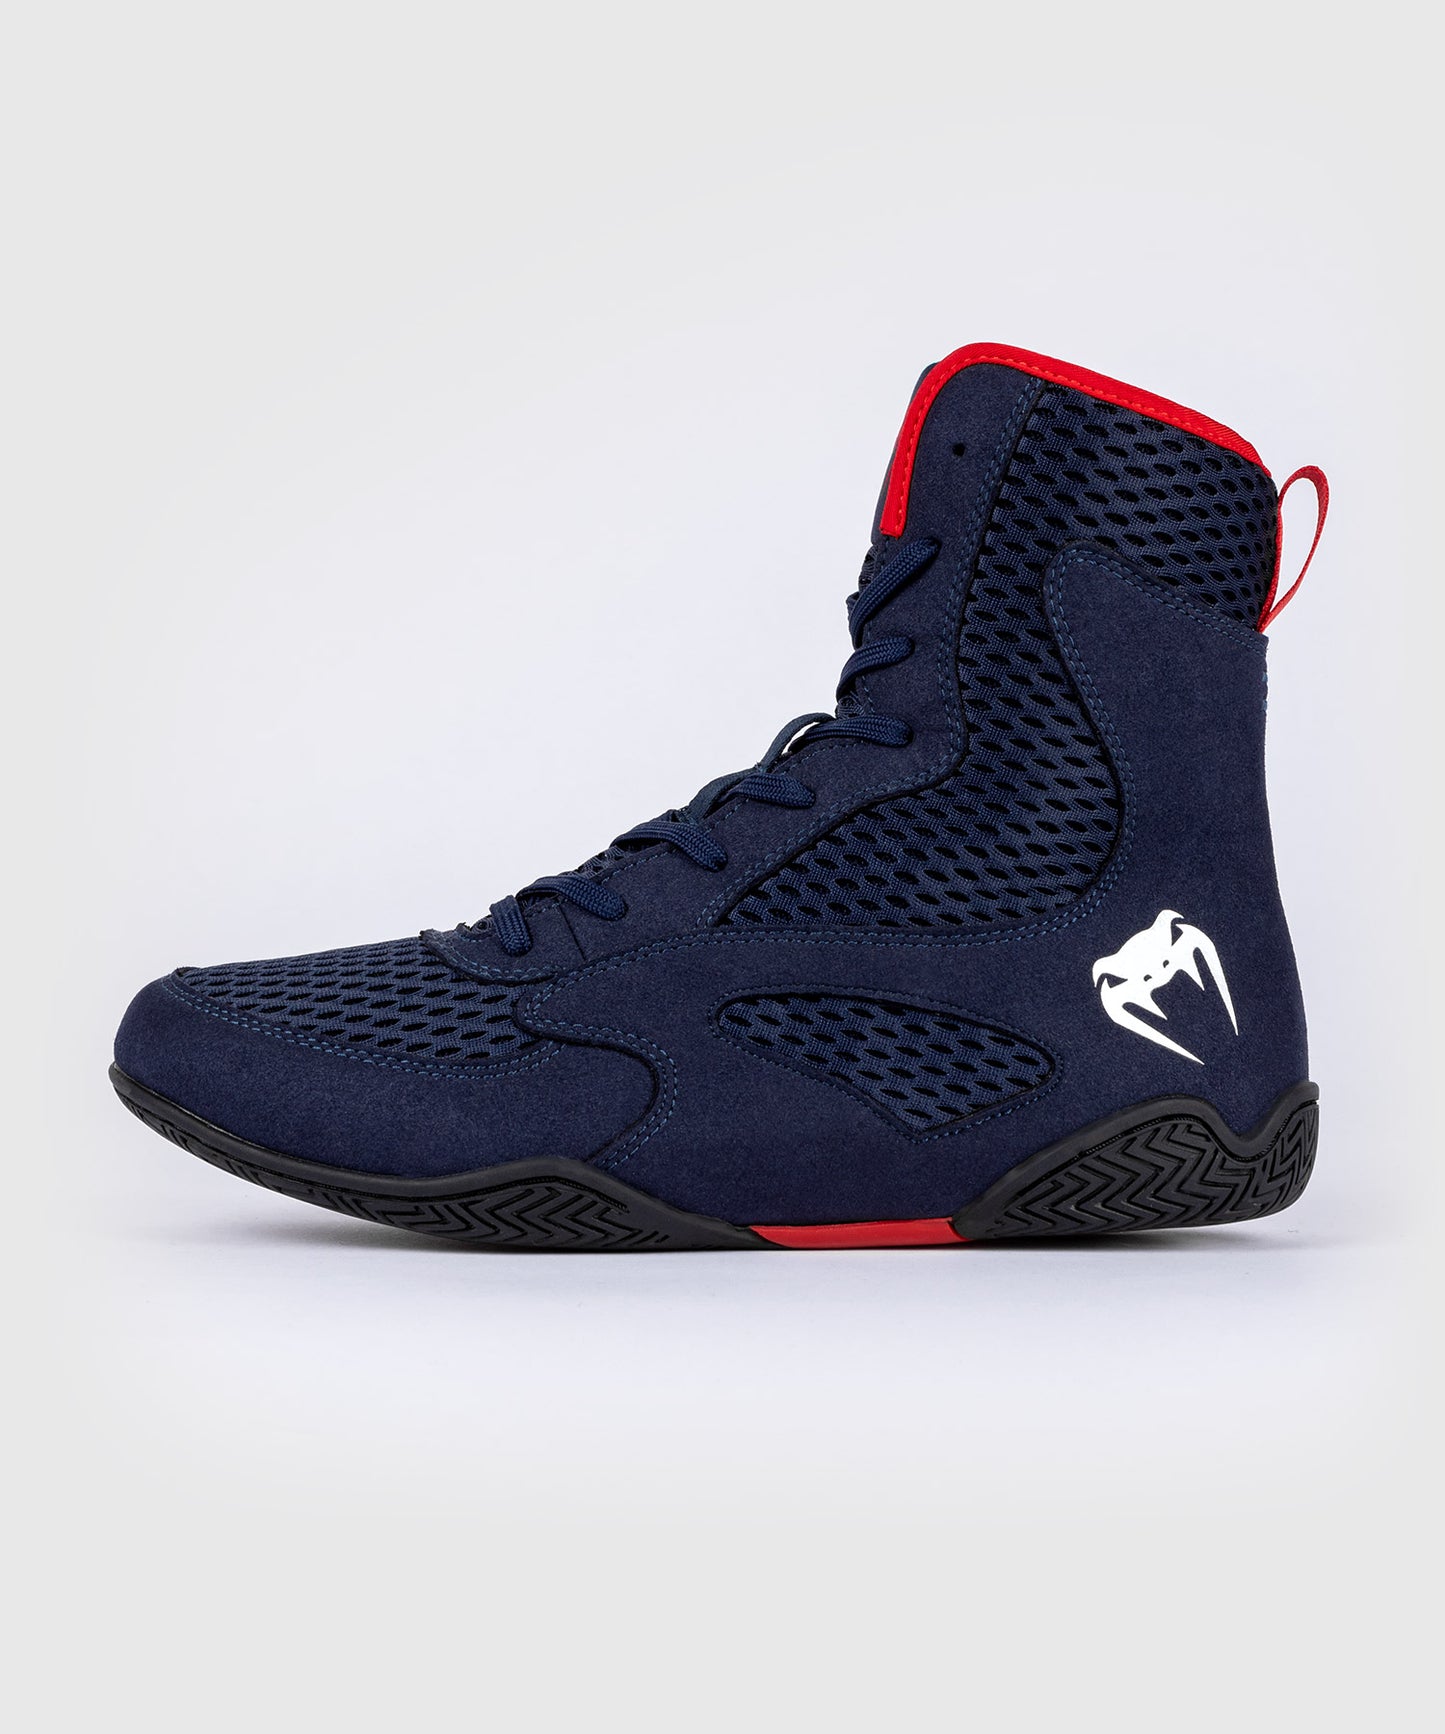 Venum Contender Boxing Shoes - Navy Blue/Red